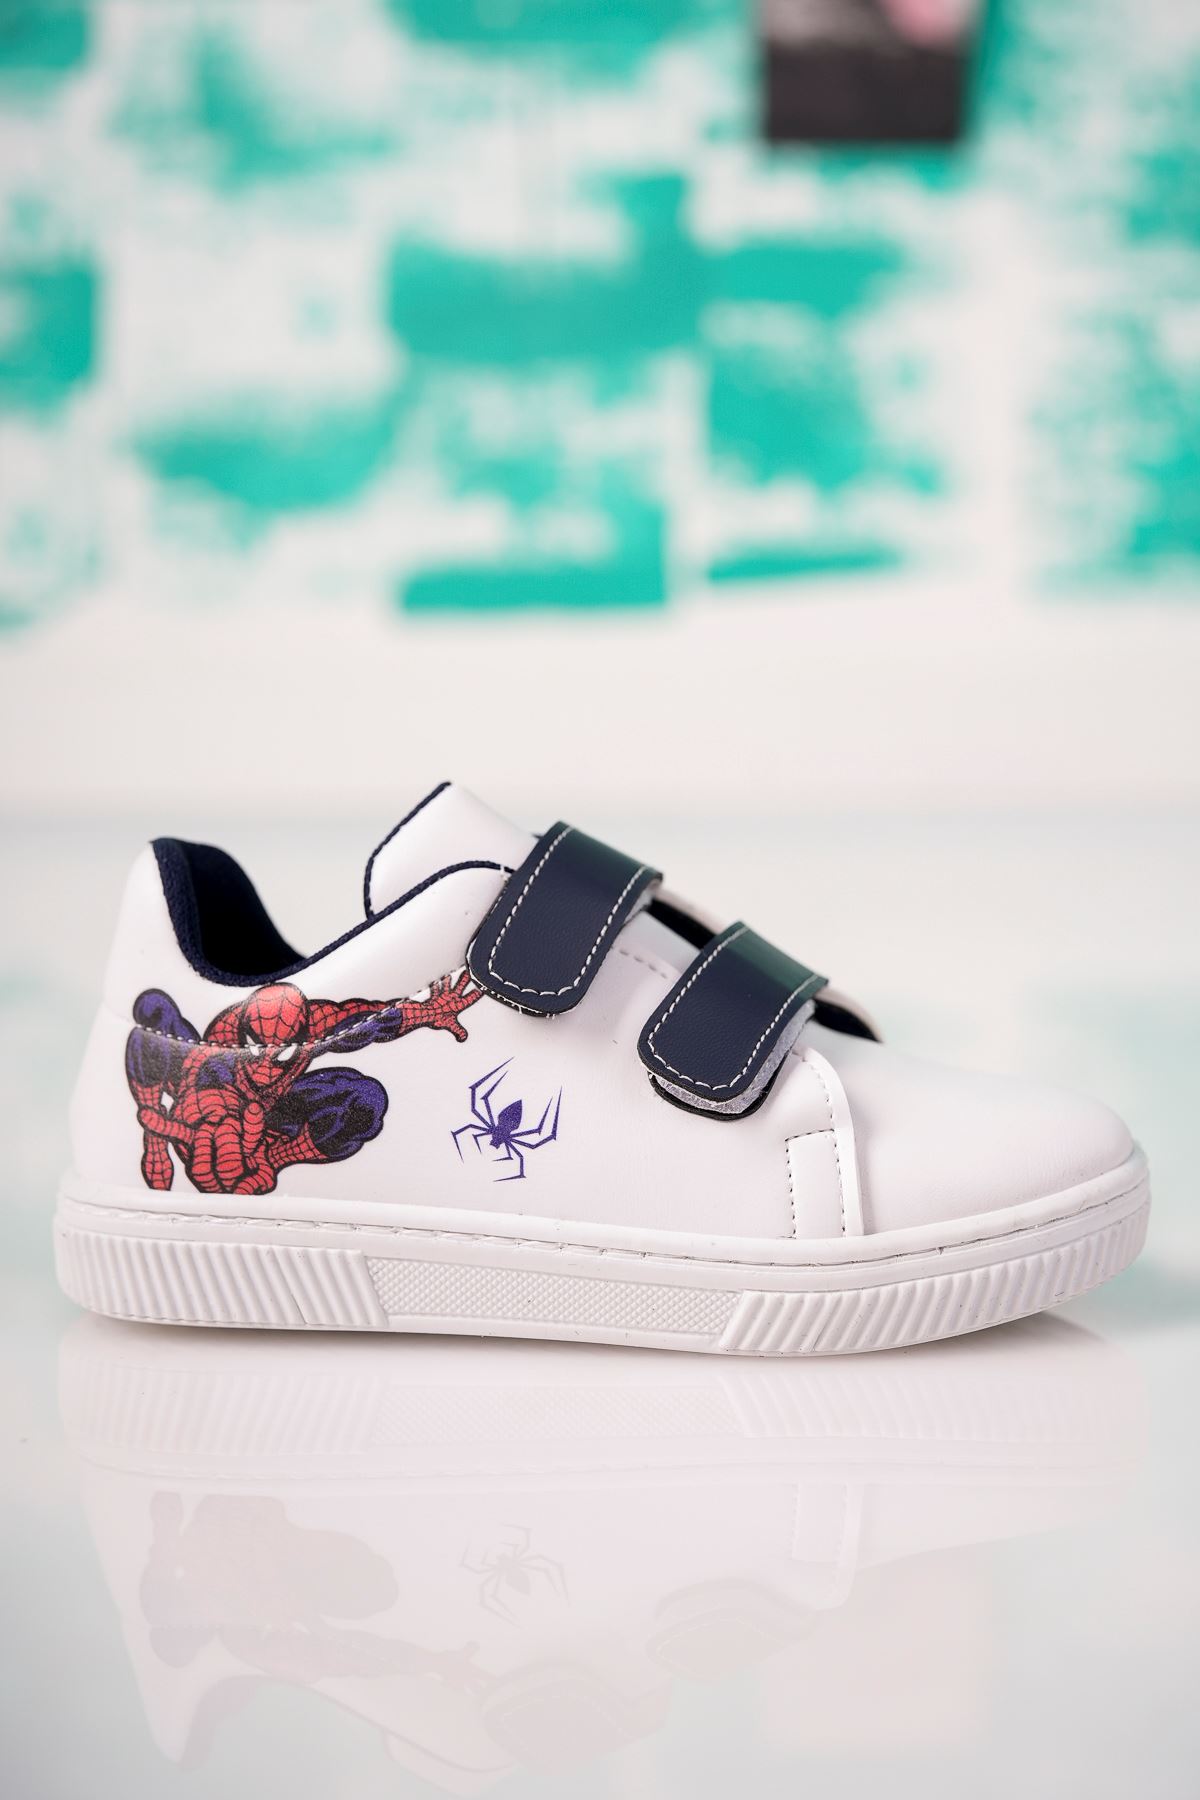 Velcro Navy Blue Printed White Kids Shoes